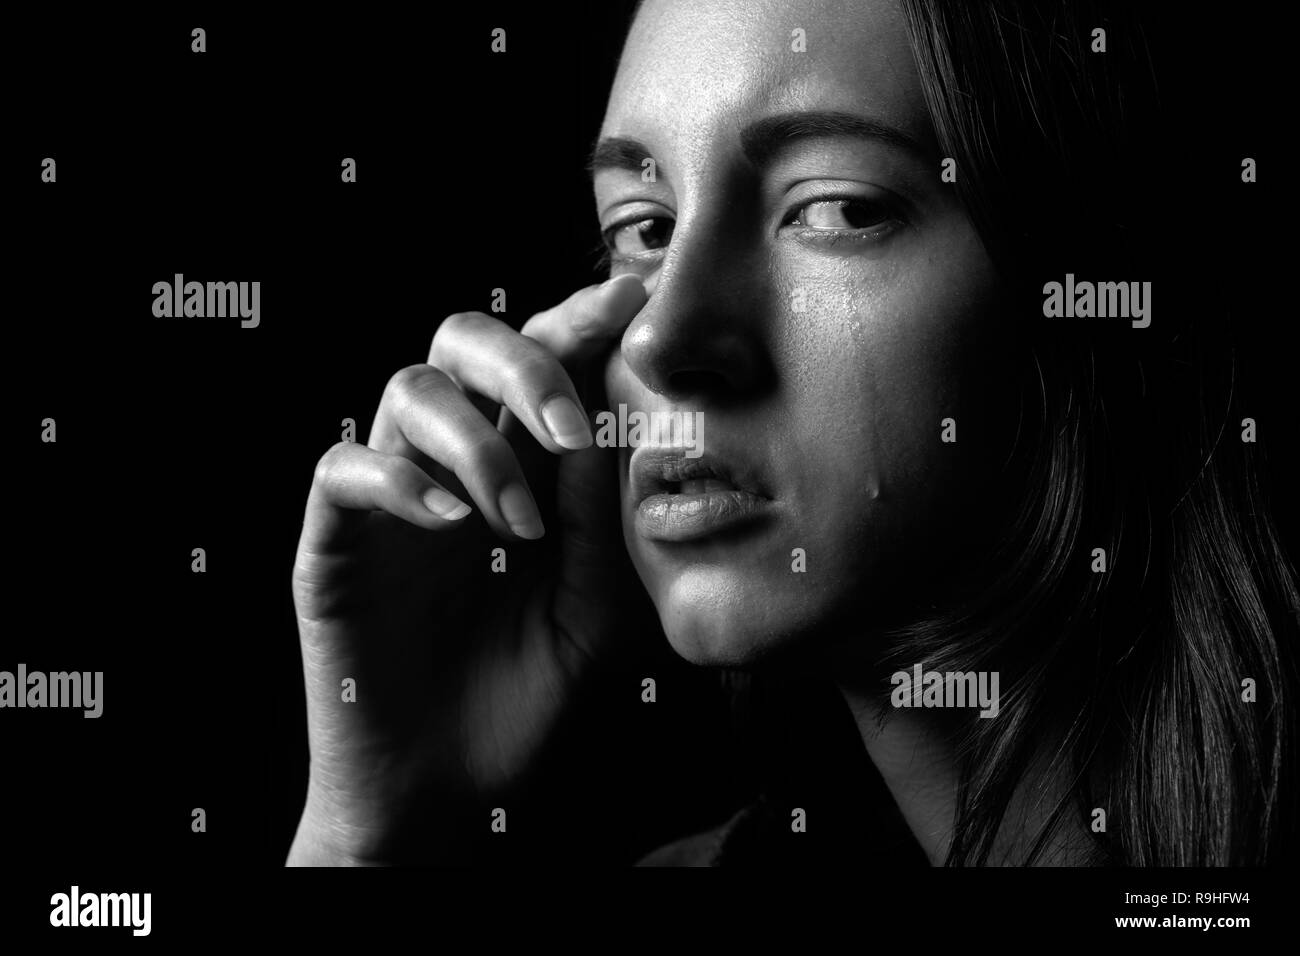 sad woman crying on black background, looking at camera, closeup portrait Stock Photo